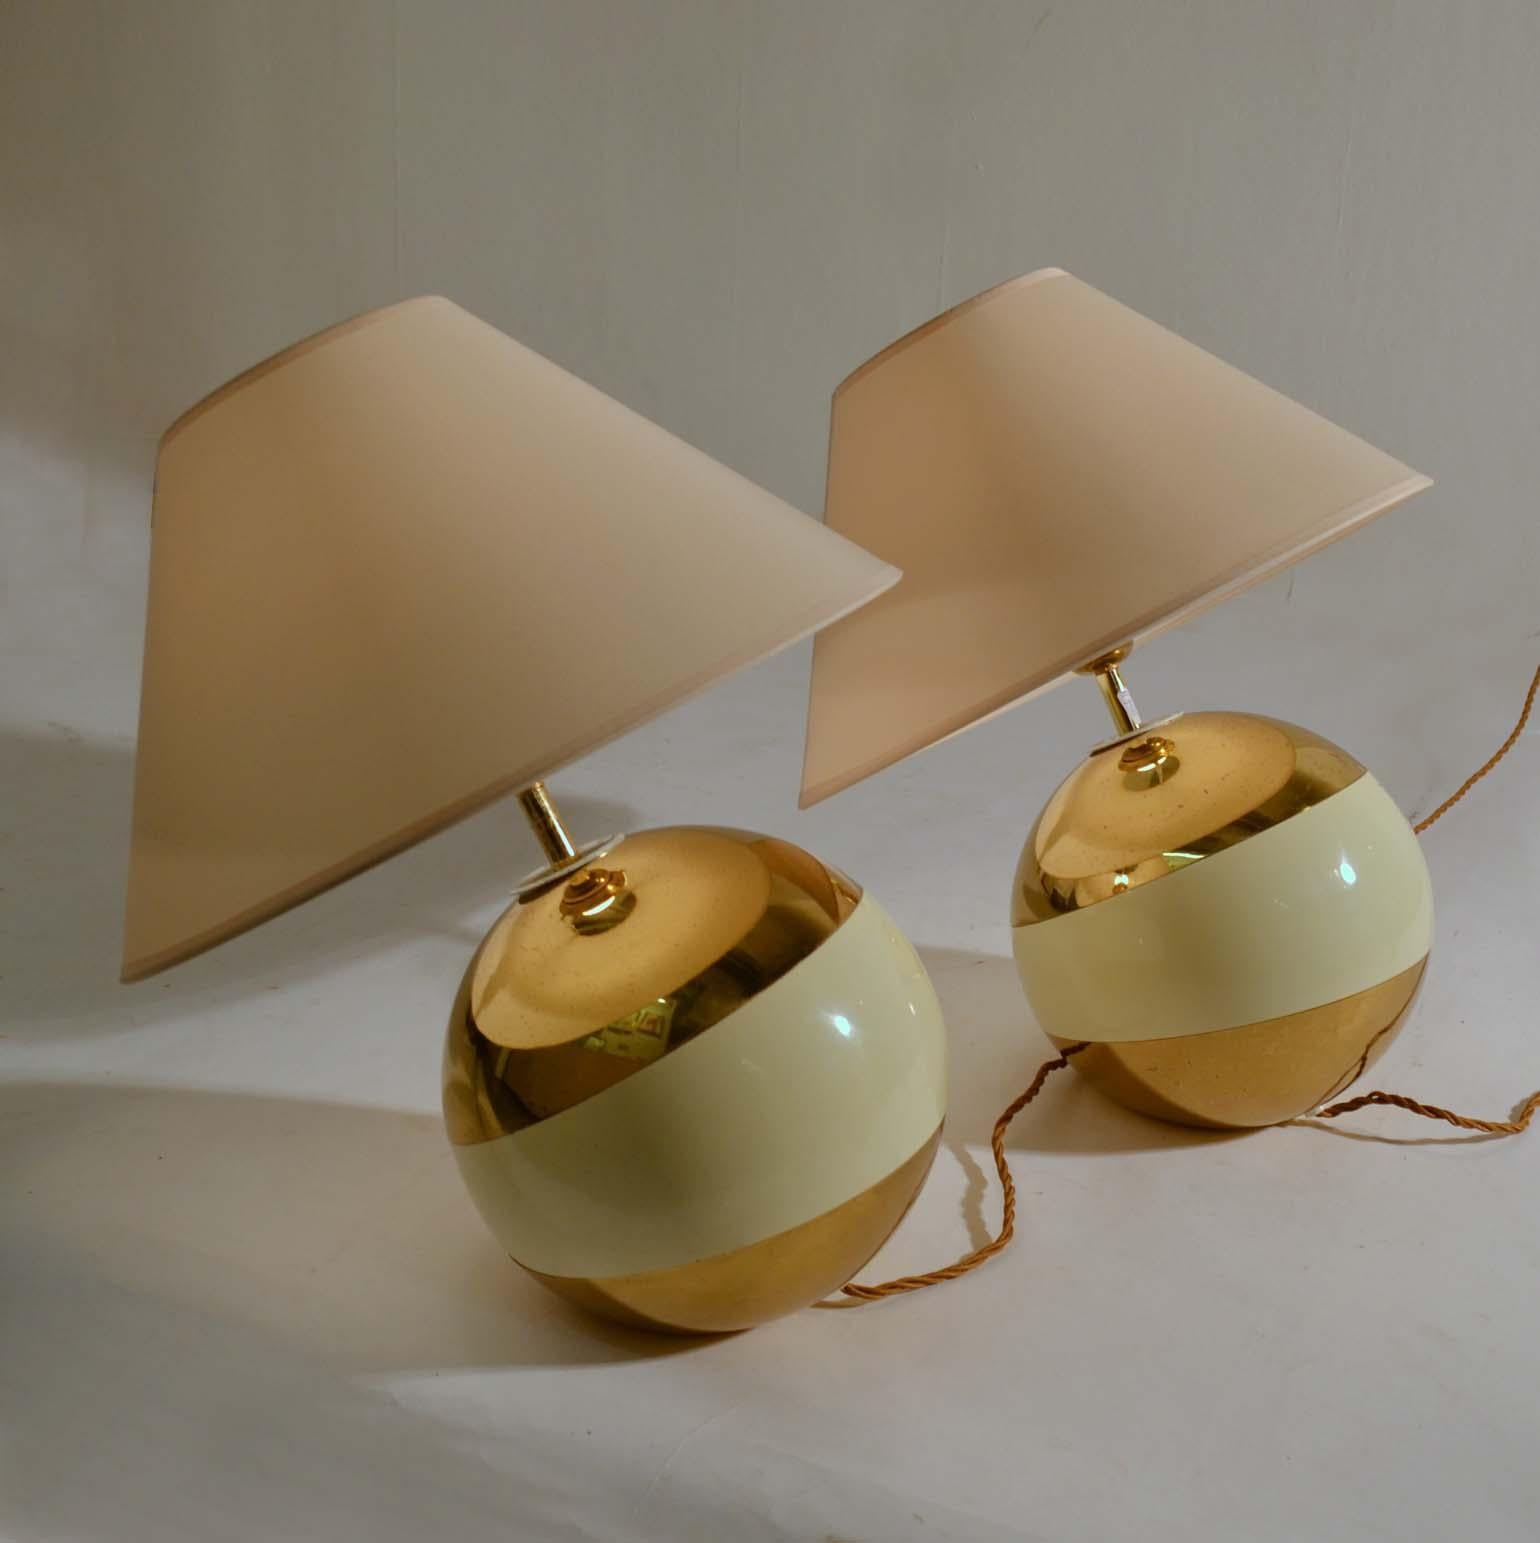 Pair of Ball Shaped Brass and Cream Leaning Table Lamps, Italy 1